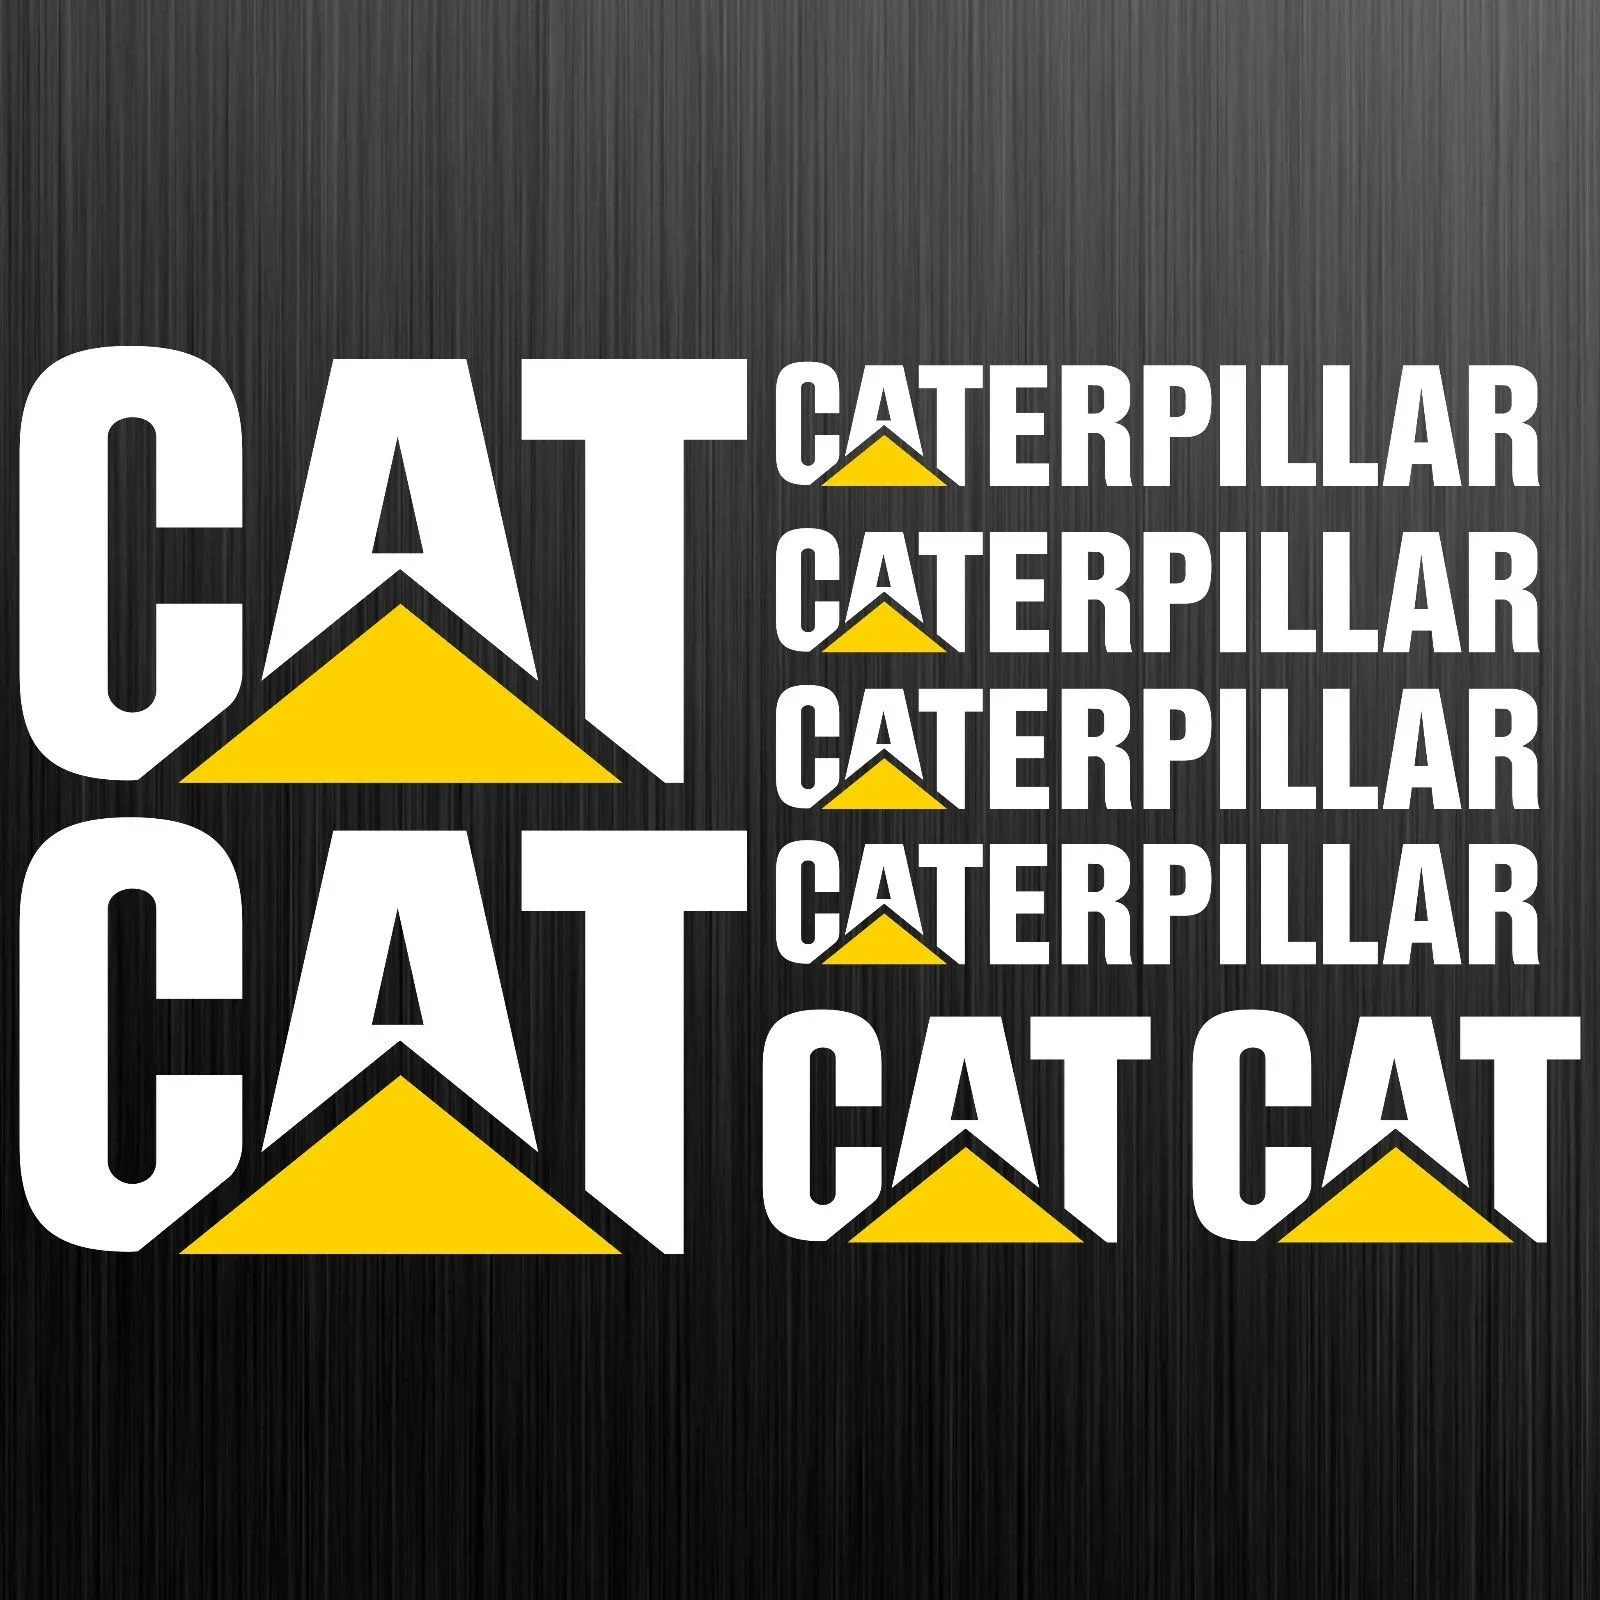 

Car Sticker Sunscreen Waterproof PVC Funny for Caterpillar CAT Aufkleber Sticker Bagger Excavator Styling Cover Scratches,30cm